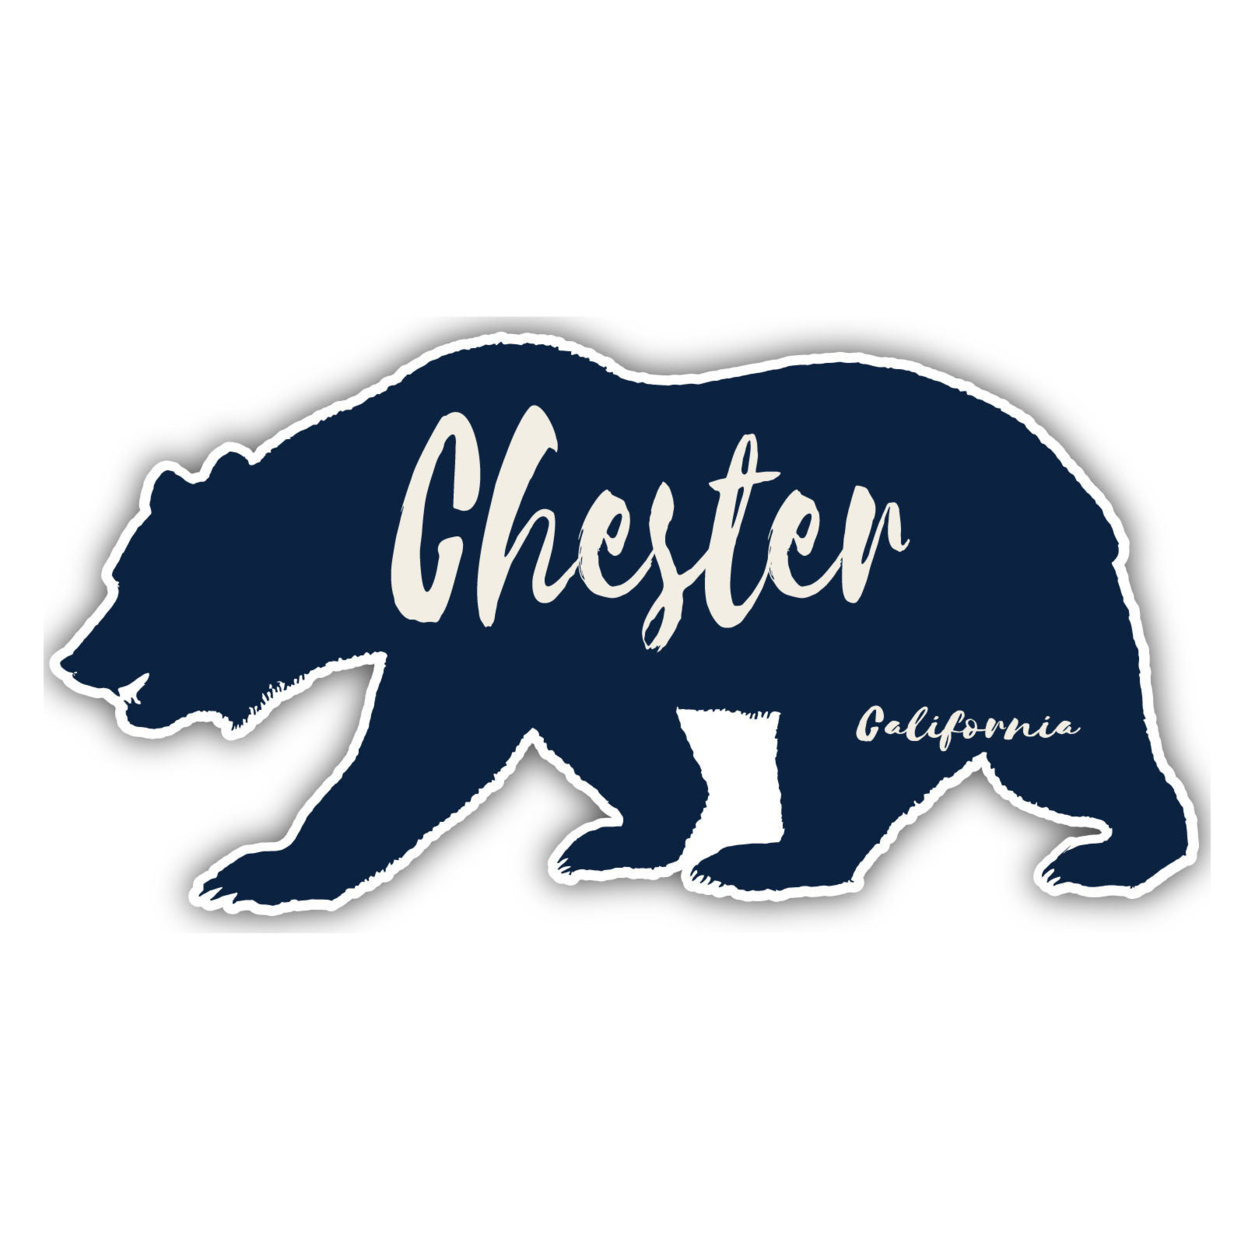 Chester California Souvenir Decorative Stickers (Choose Theme And Size) - 4-Pack, 10-Inch, Bear